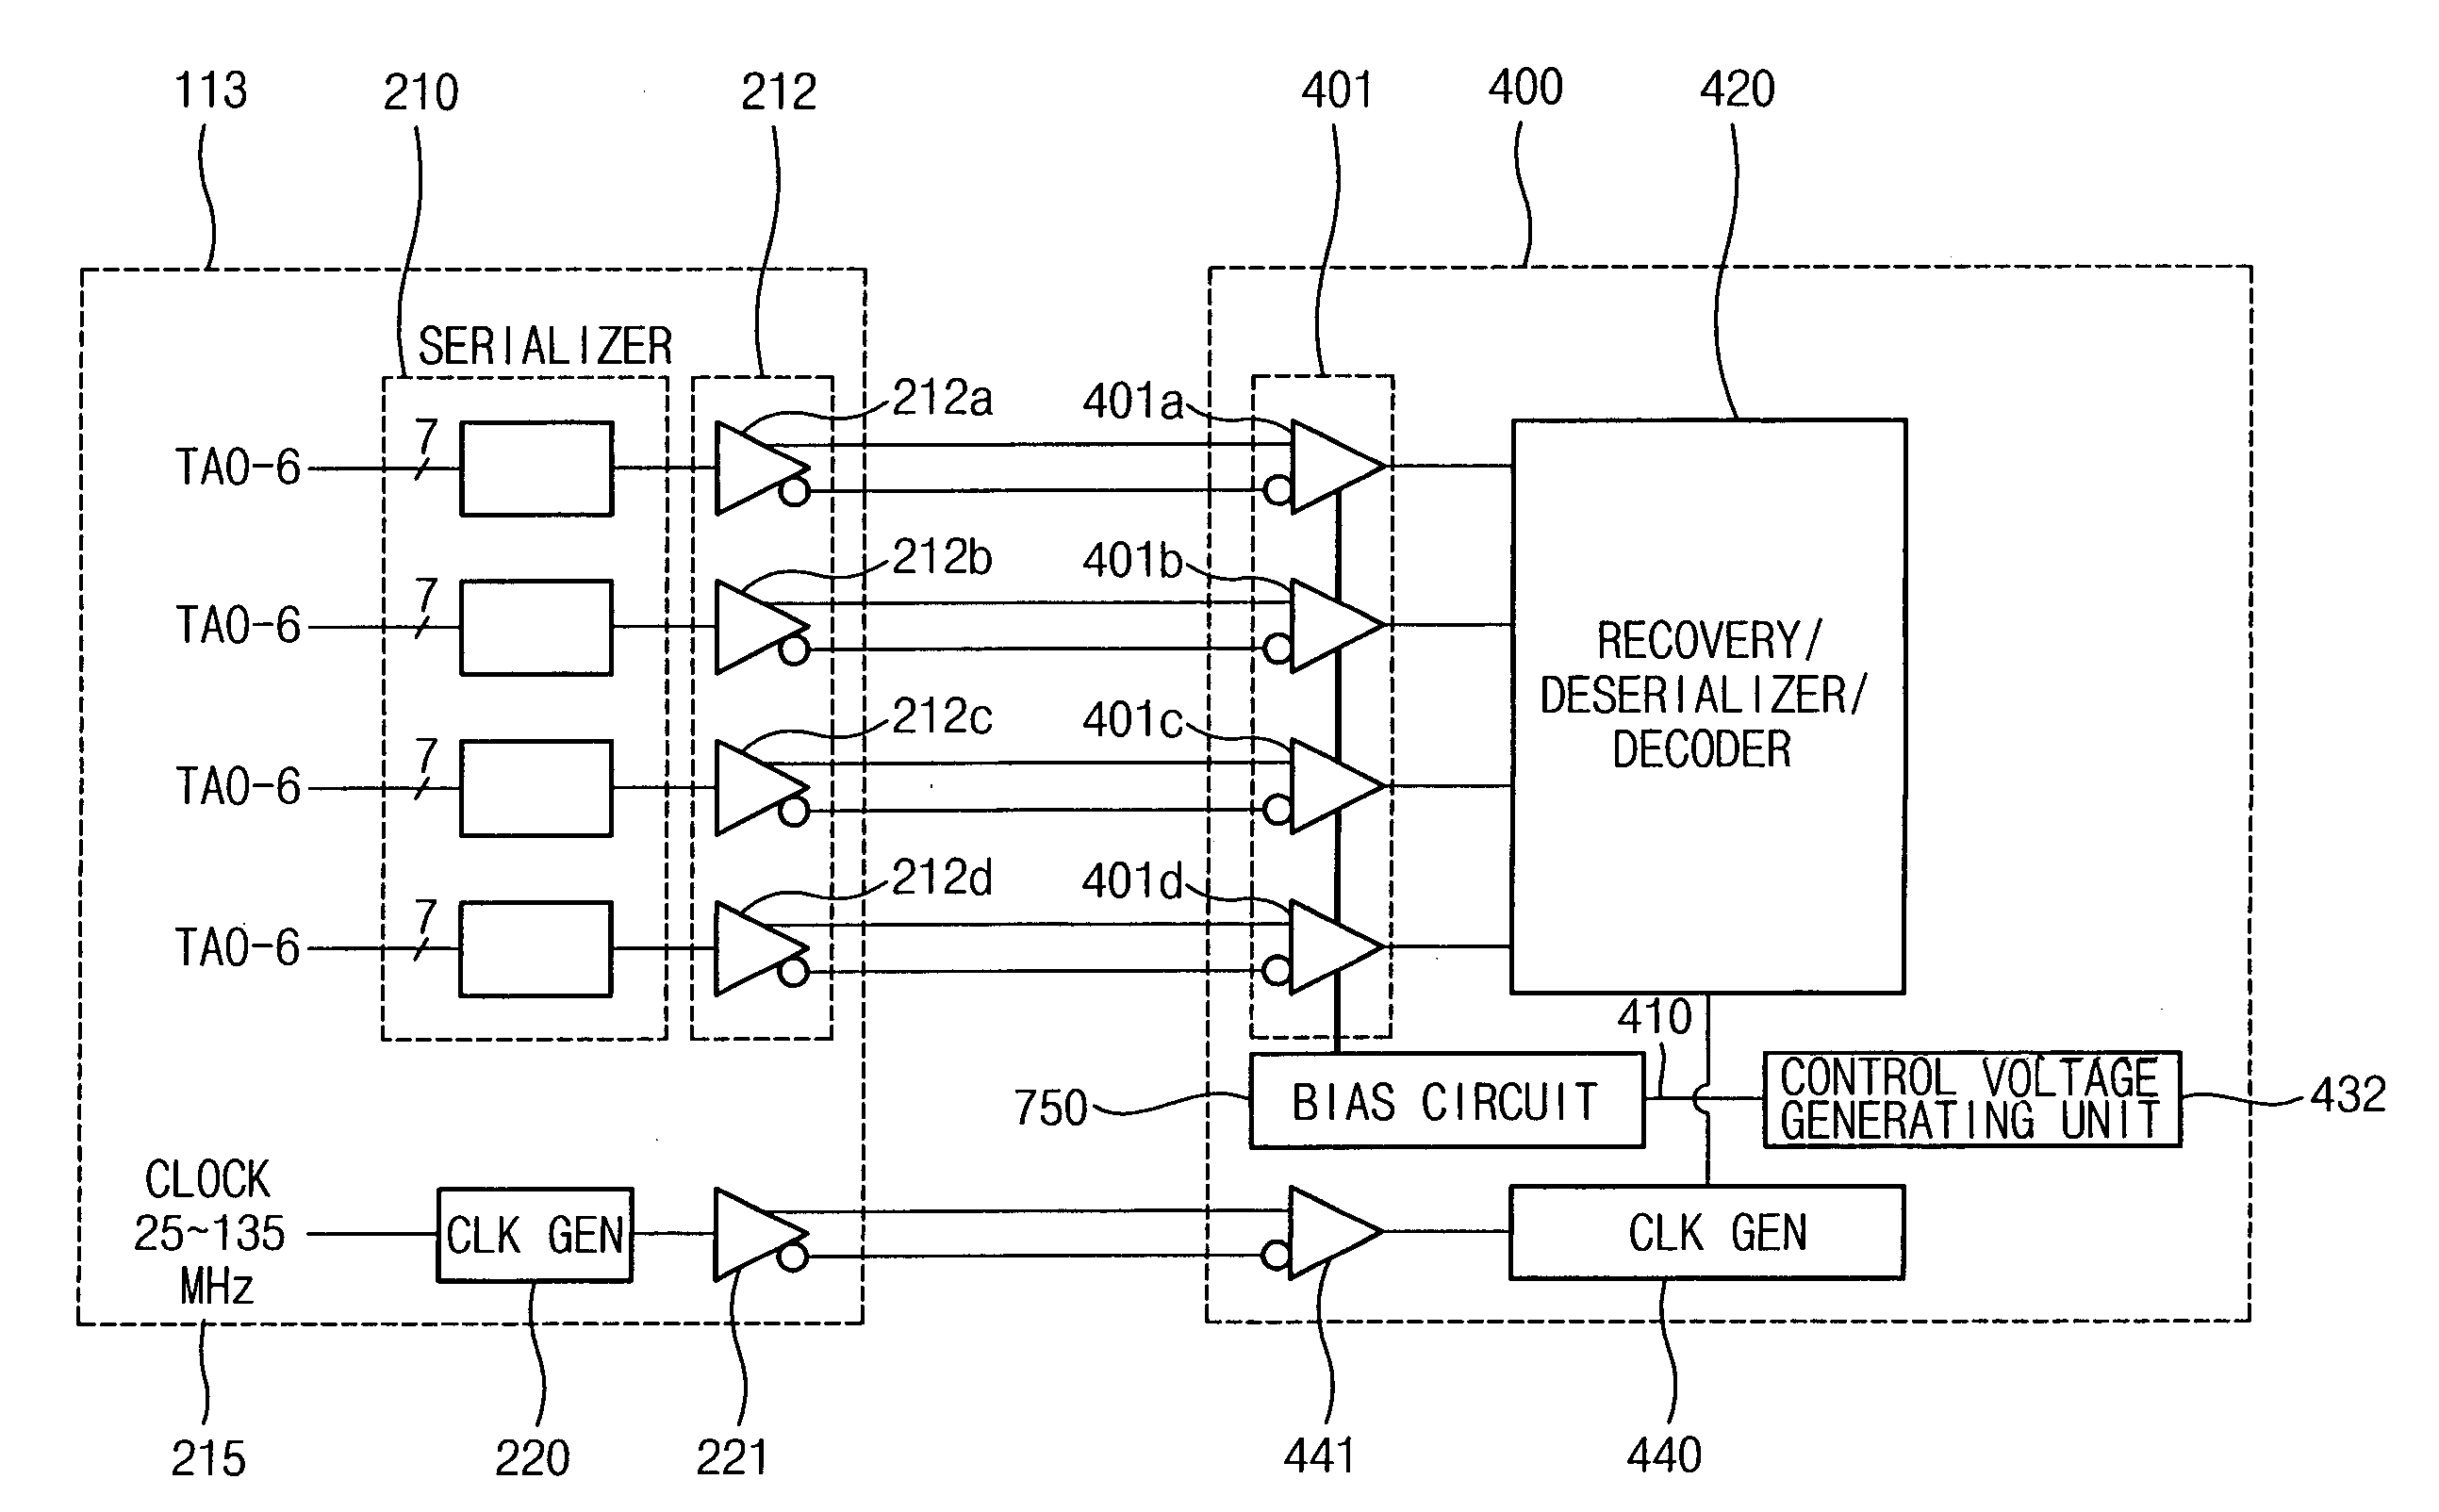 LVDS receiver for controlling current based on frequency and method of operating the LDVS receiver